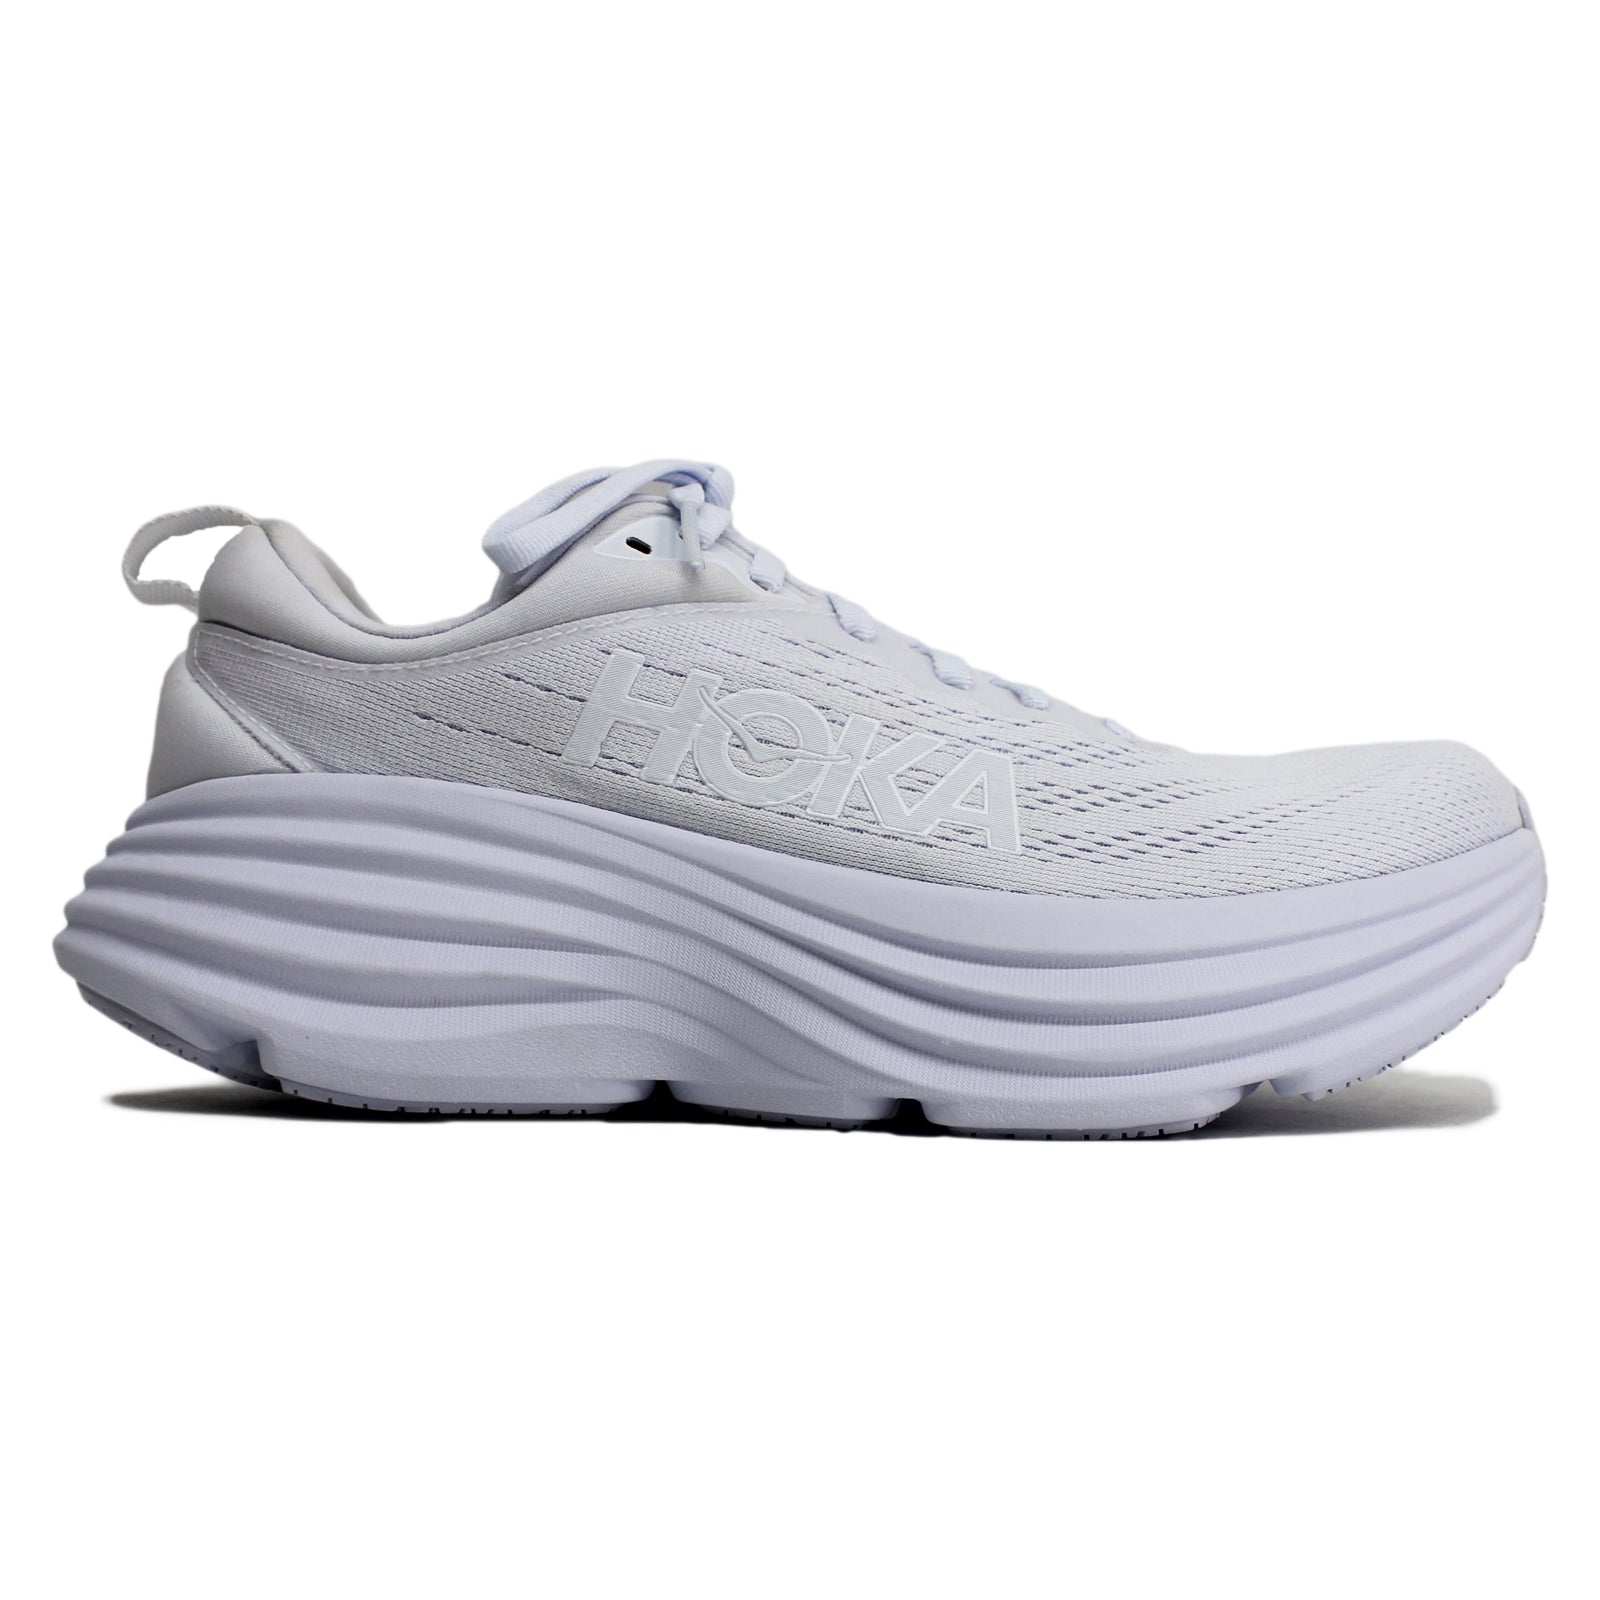 Hoka One One Womens Trainers Bondi 8 Lace Up Low Top Sneakers Textile - UK 6.5